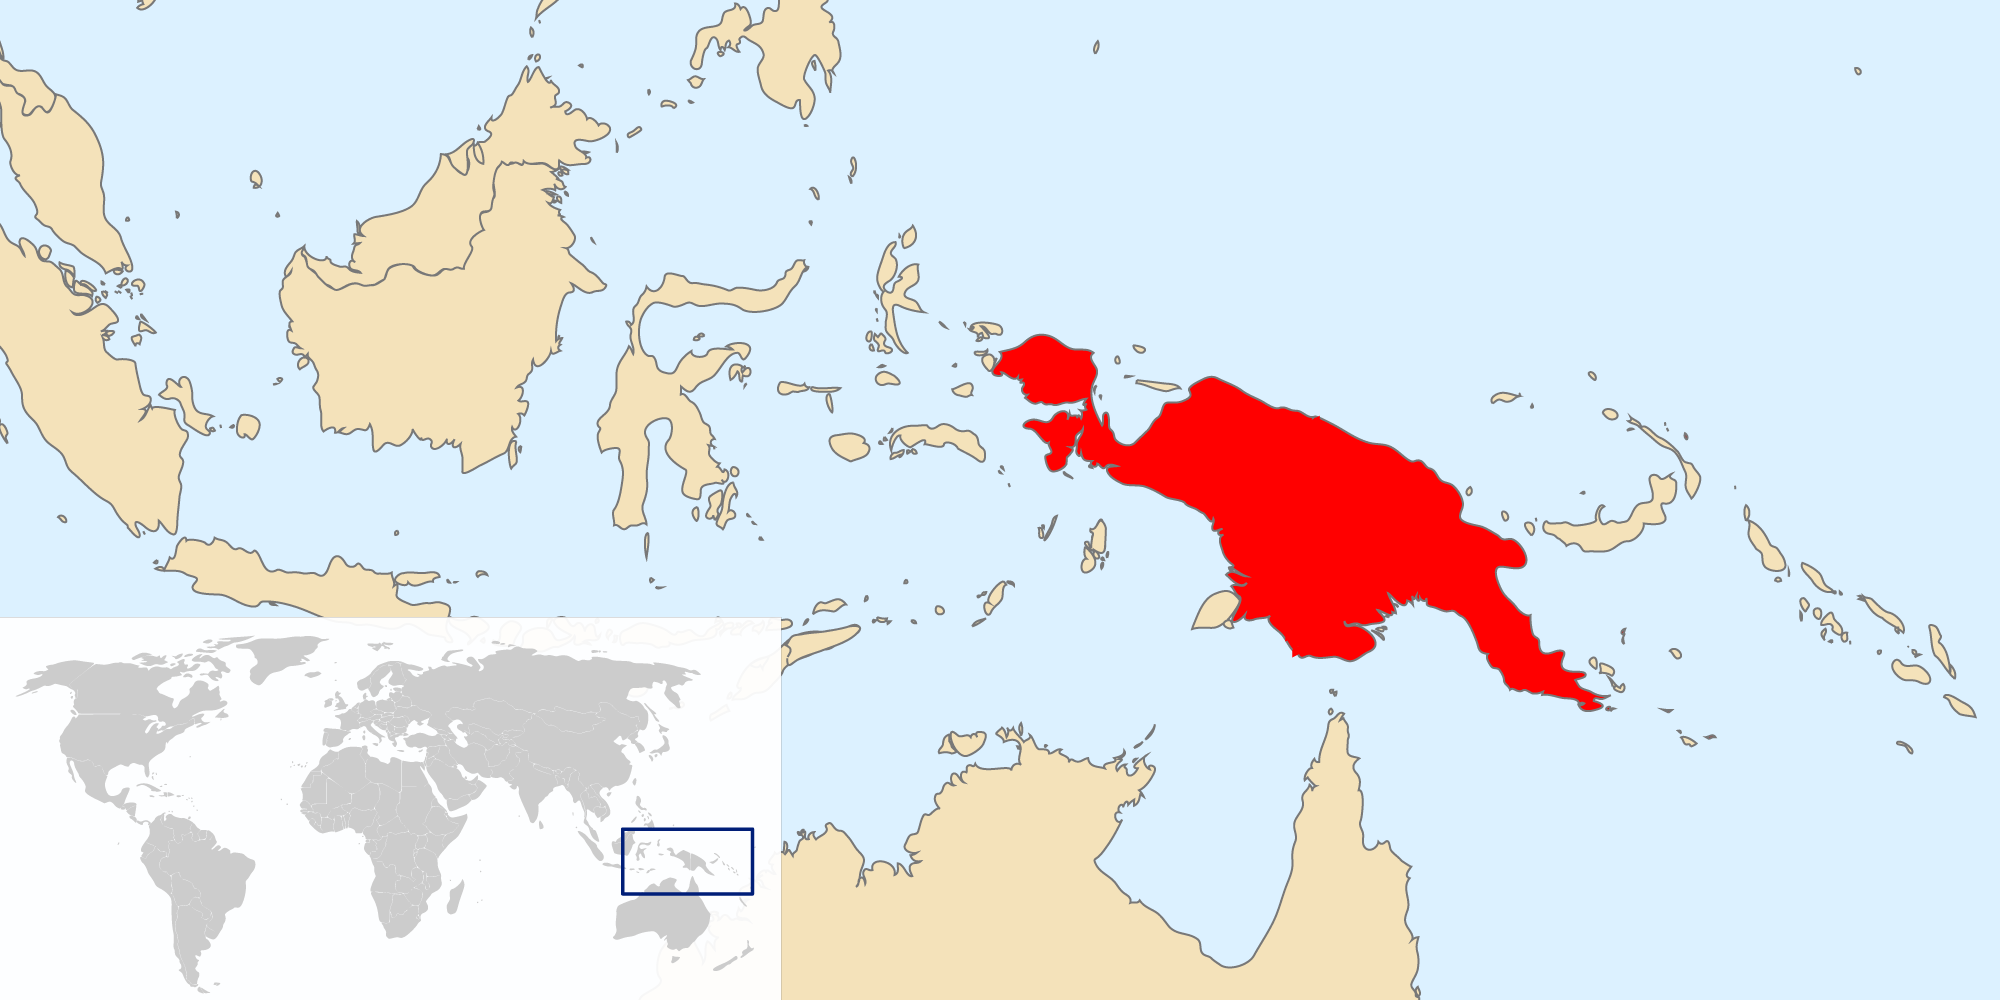 Map showing the location of the island of New Guinea, which is a large island north of Australia.